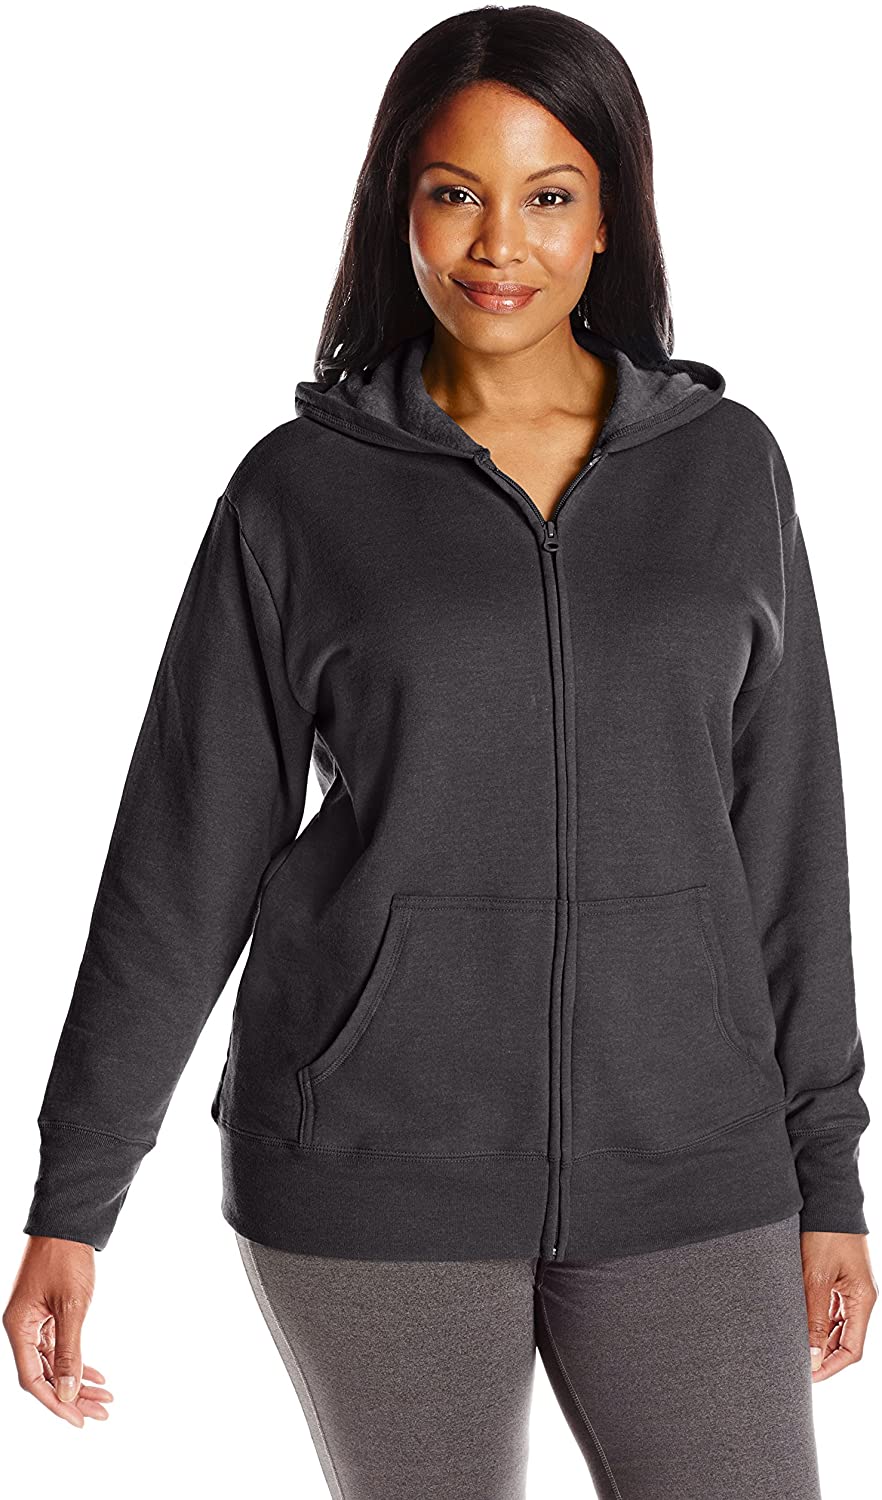 JUST MY SIZE Womens Plus Size Active Full-Zip Mock Neck Jacket 